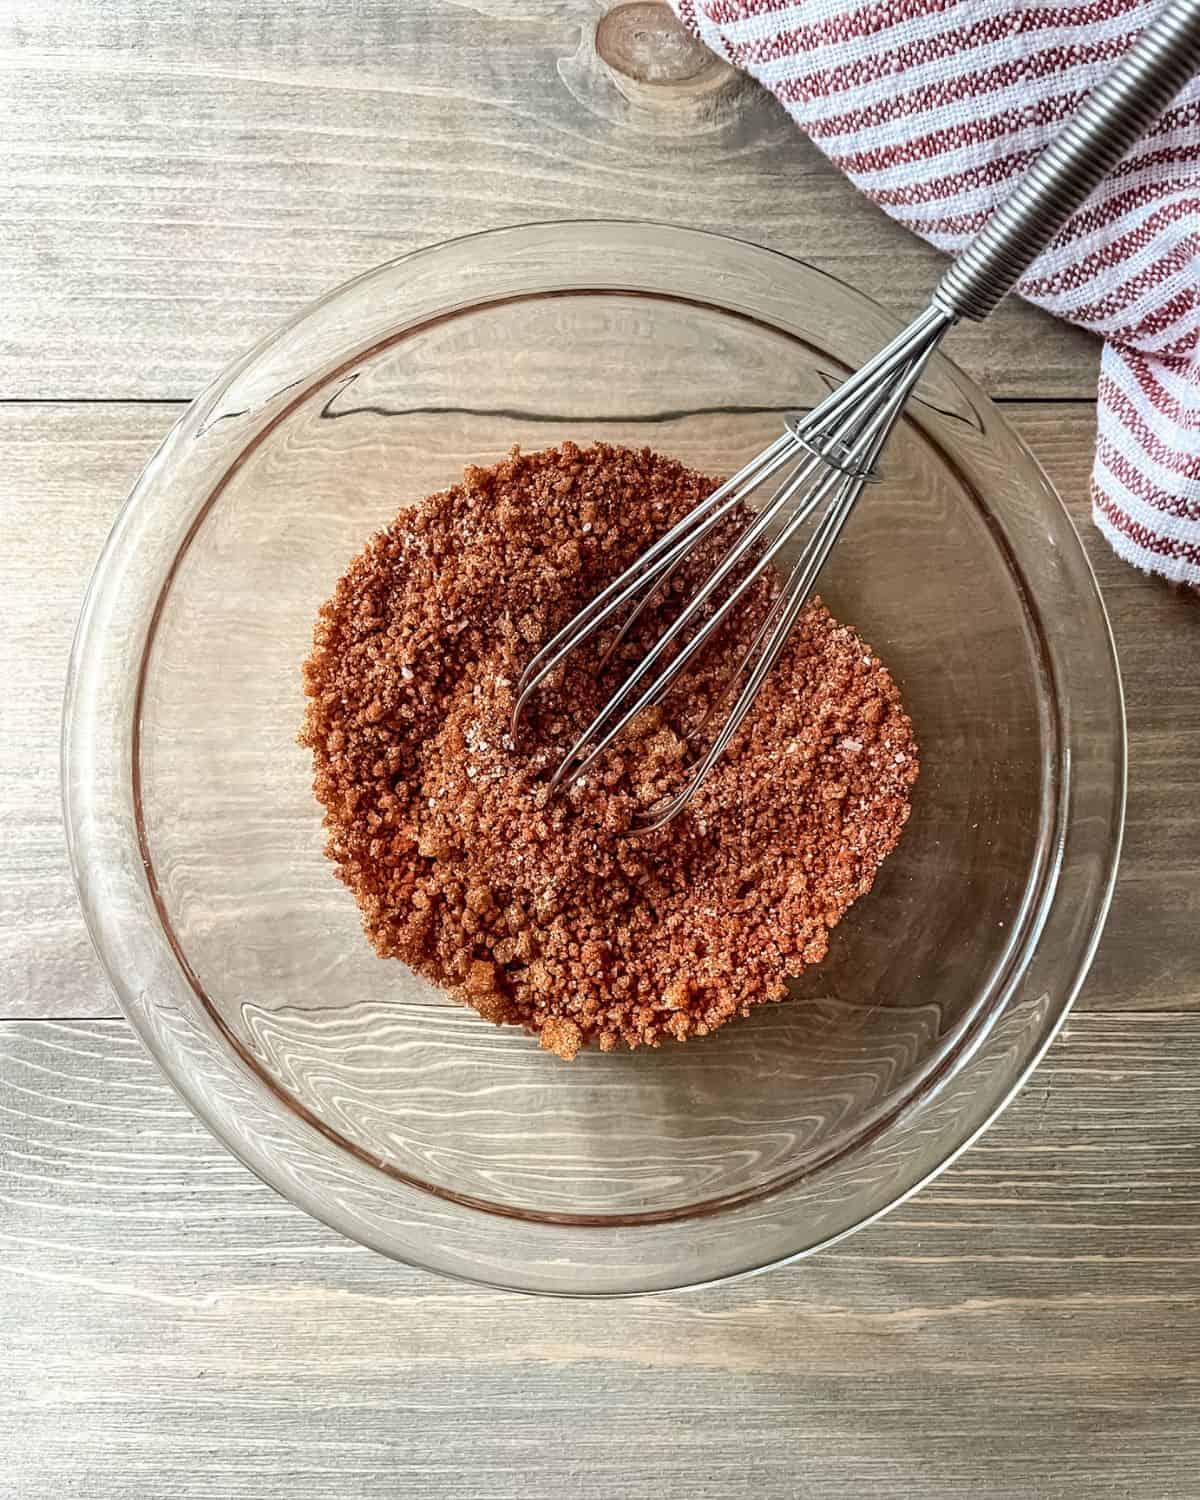 BBQ seasoning blend in a glass bowl with a whisk and a red and white striped dish towel in the corner.